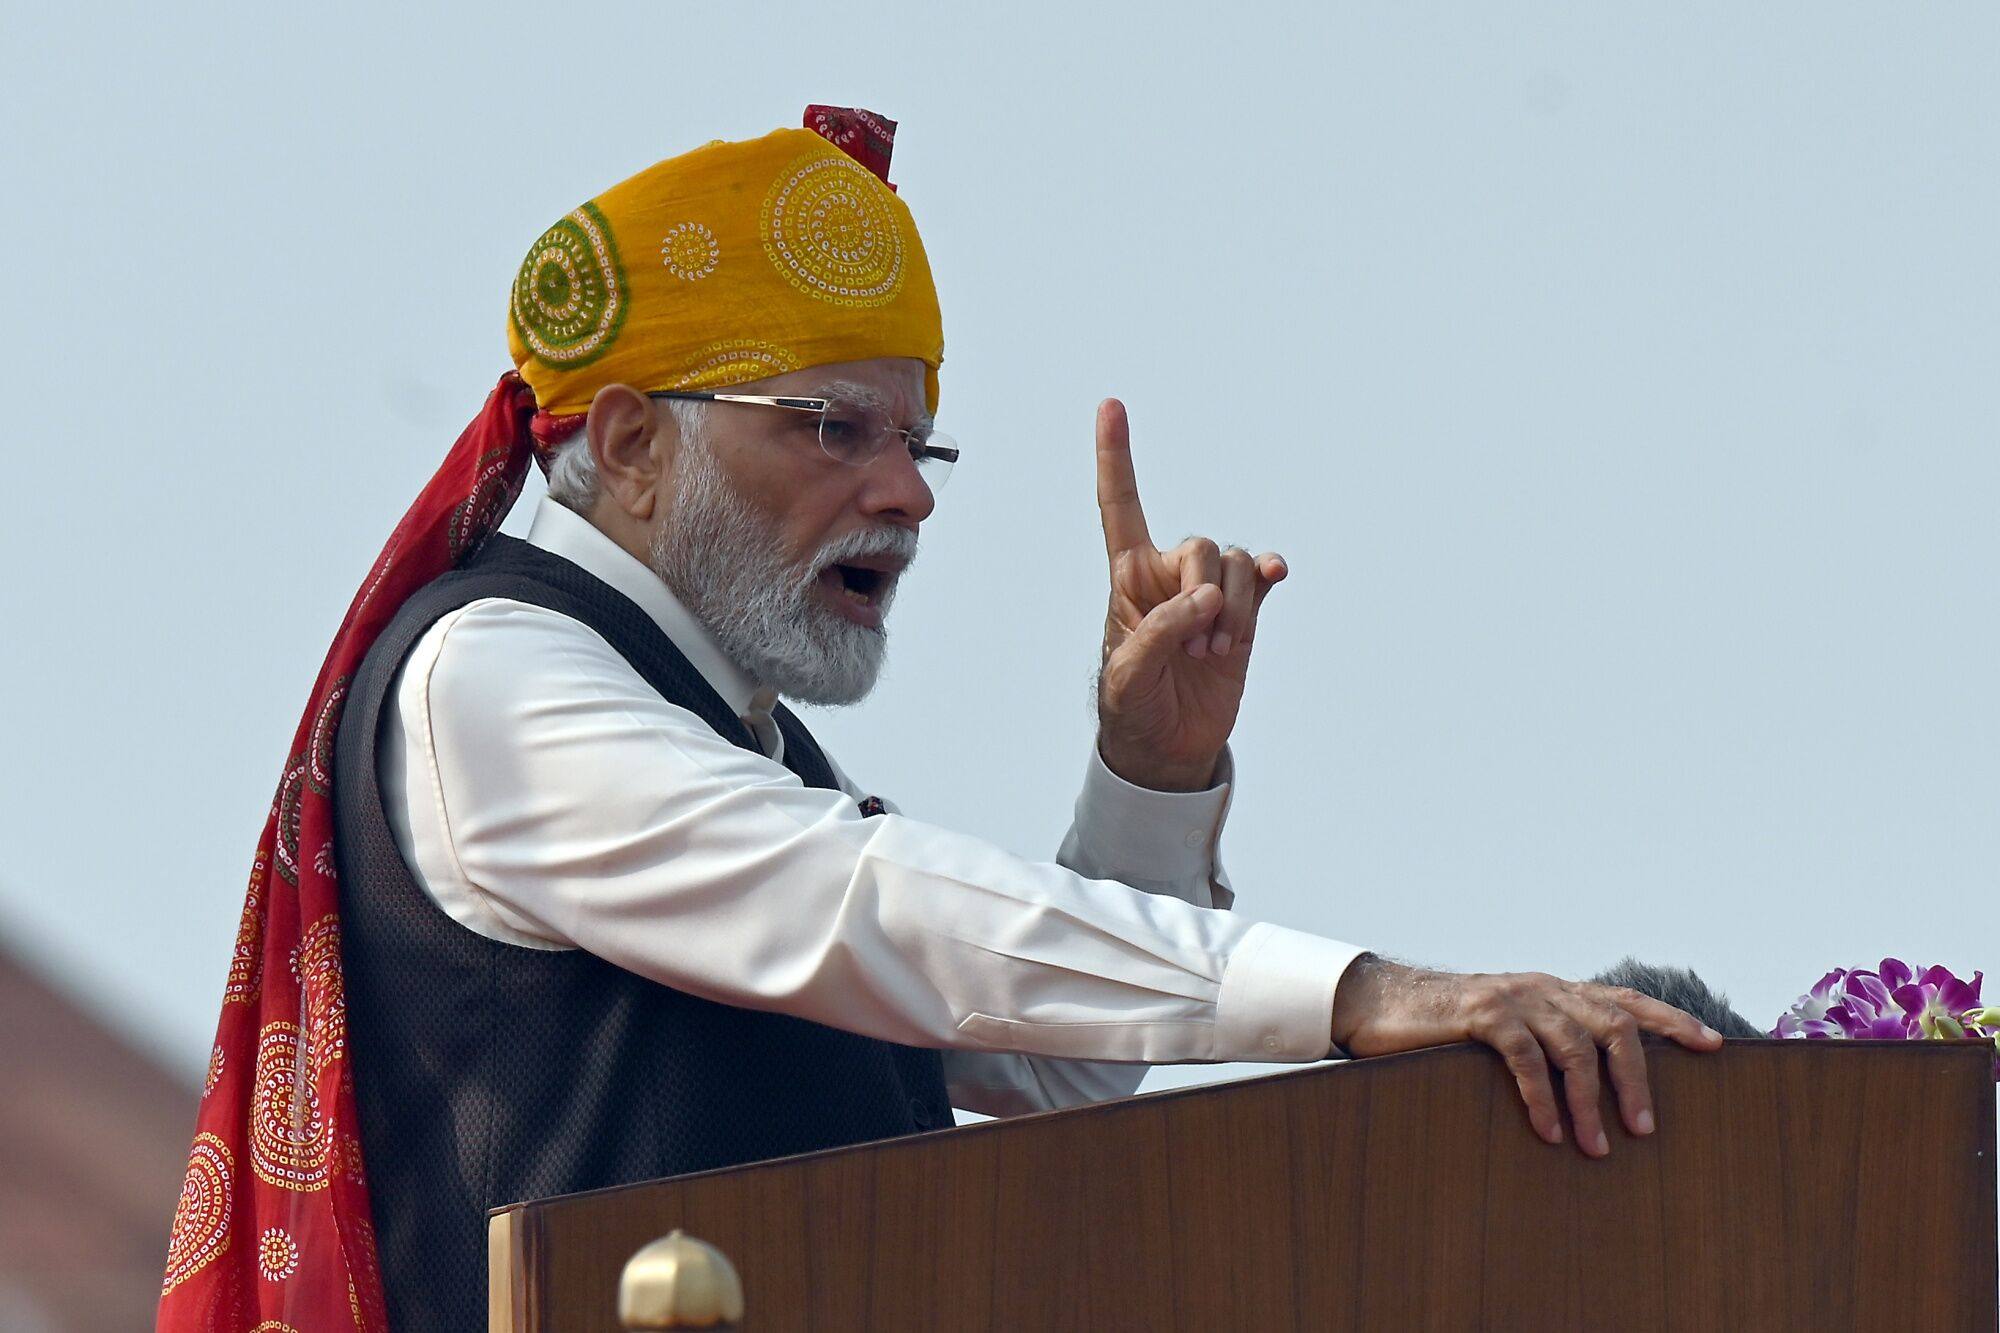 Narendra Modi, India’s prime minister, speaking at the Independence Day ceremony at Red Fort in New Delhi on August 15. Photo: Bloomberg